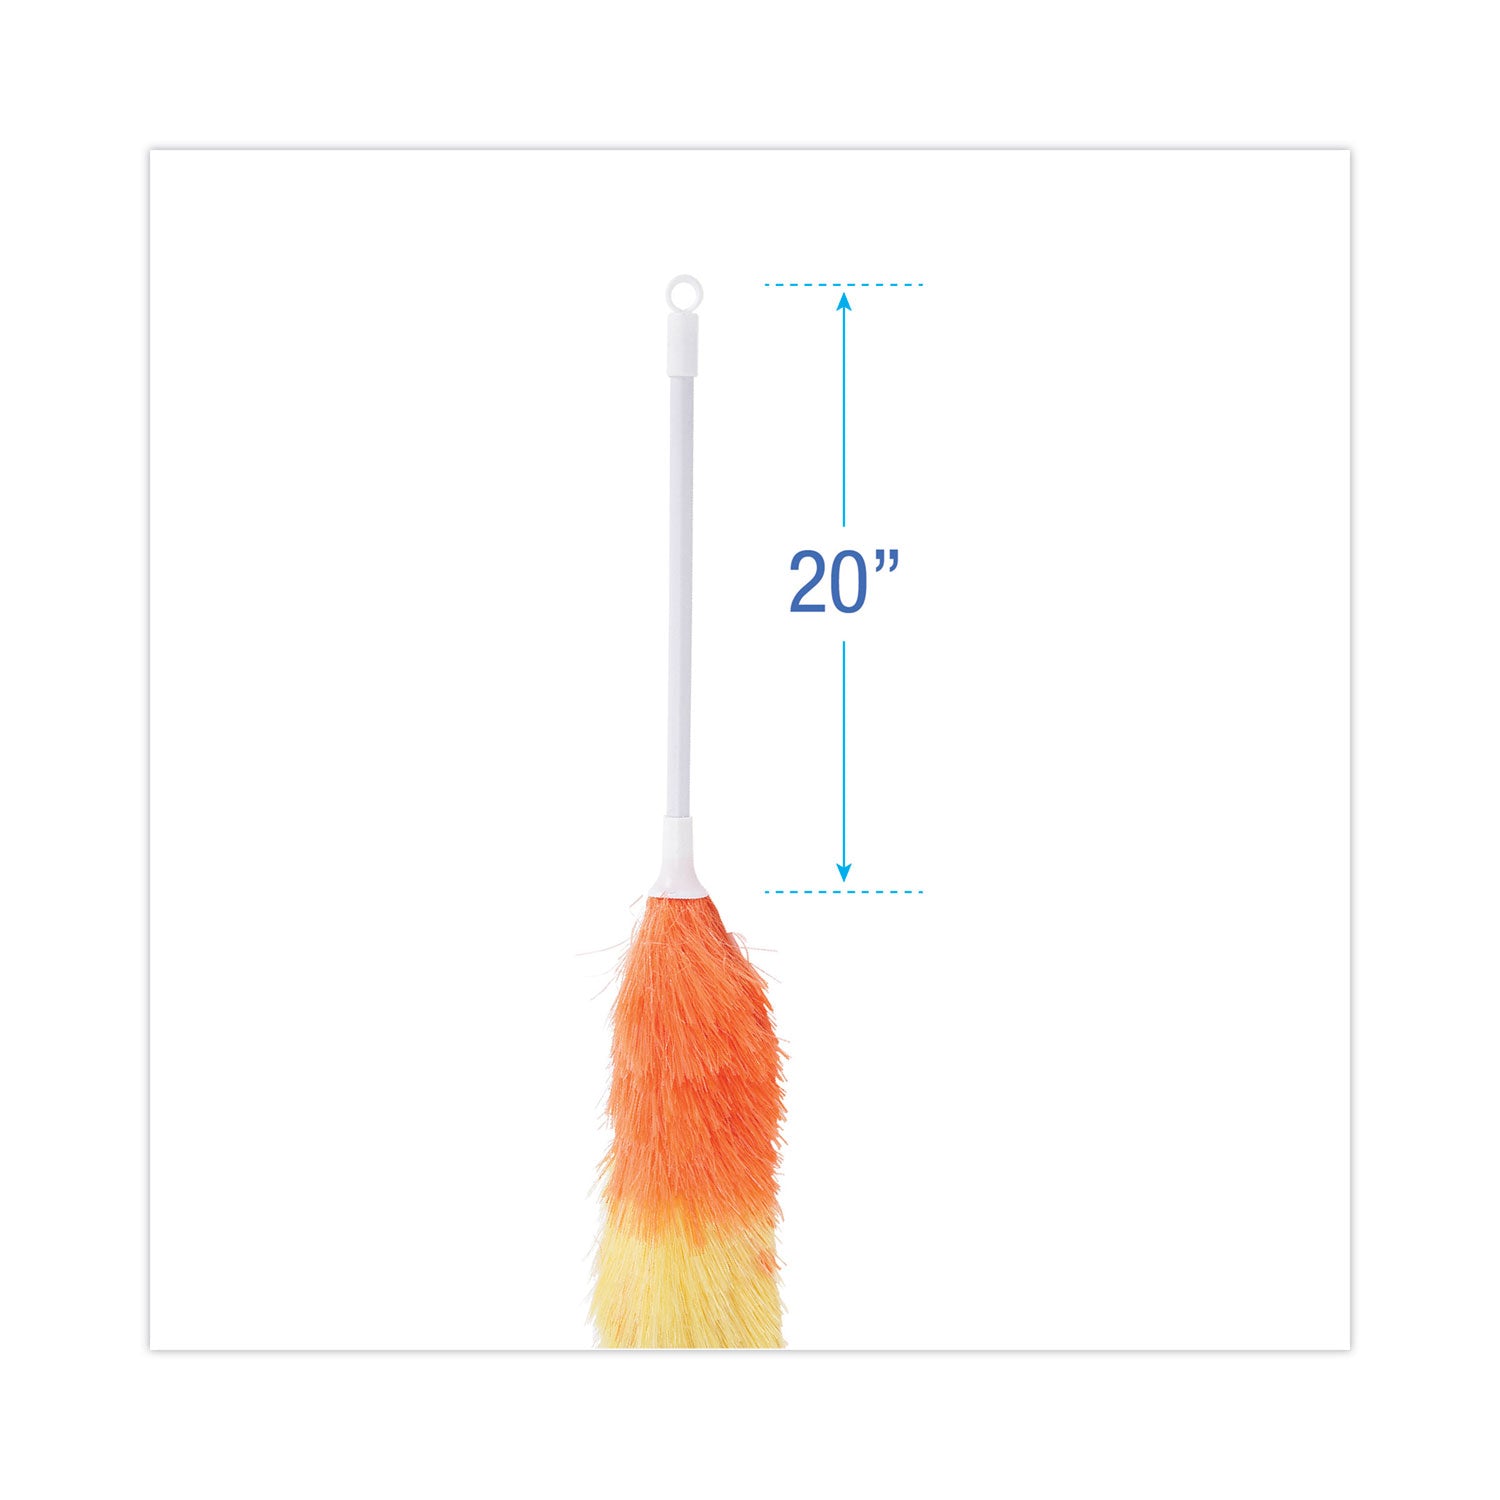 polywool-duster-w-20-plastic-handle-assorted-colors_bwk9441 - 2